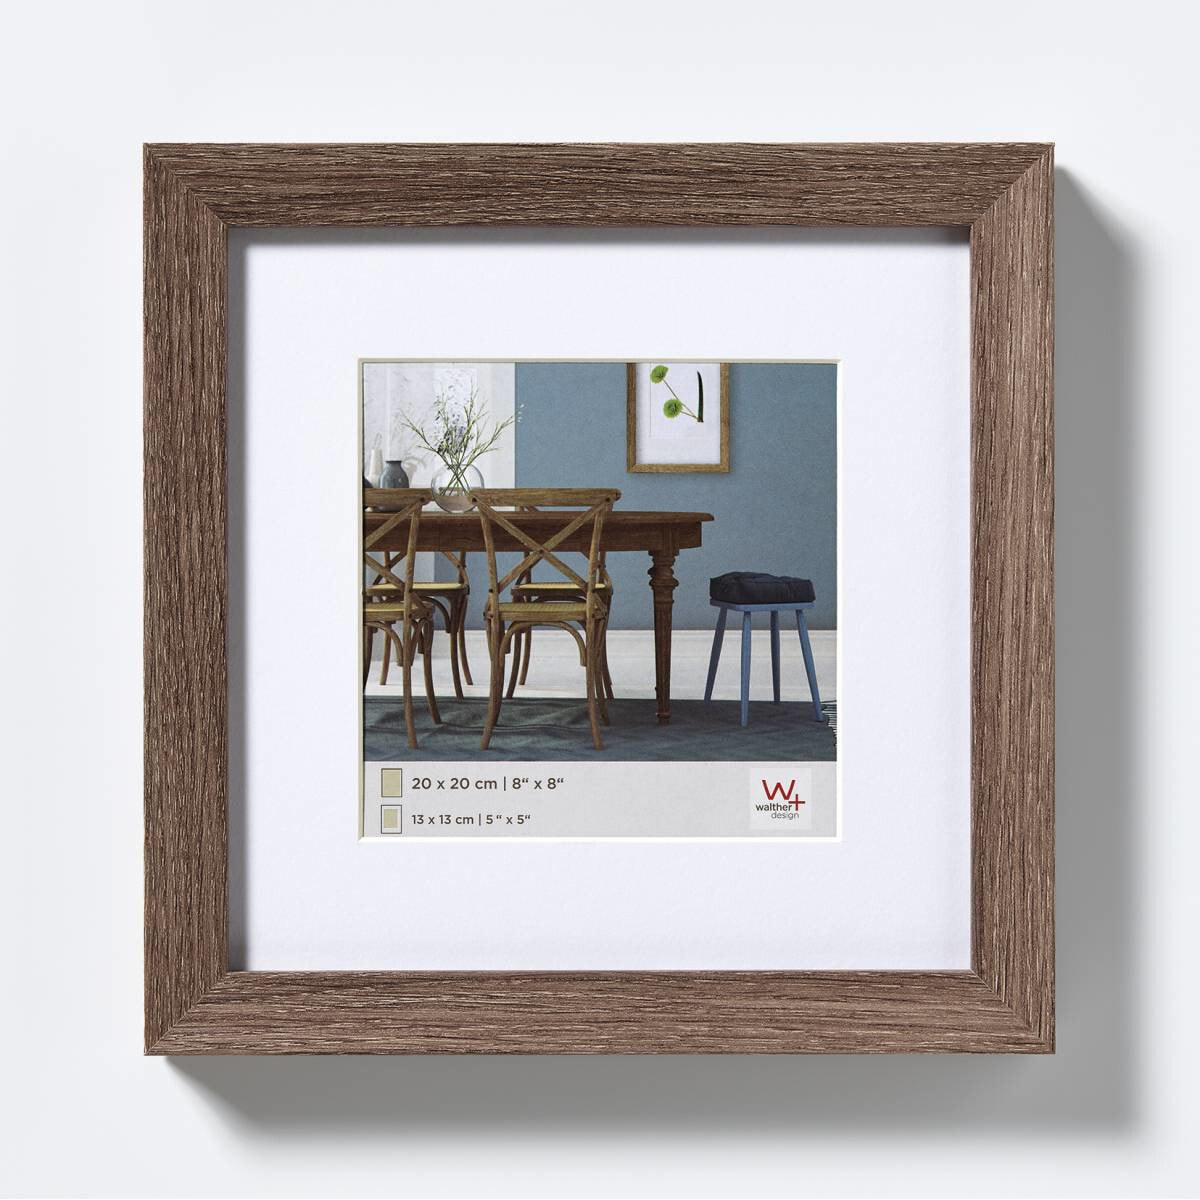 walther design EF330N - Wood - Single picture frame - 18 x 18 cm - Rectangular - Germany - 315 mm